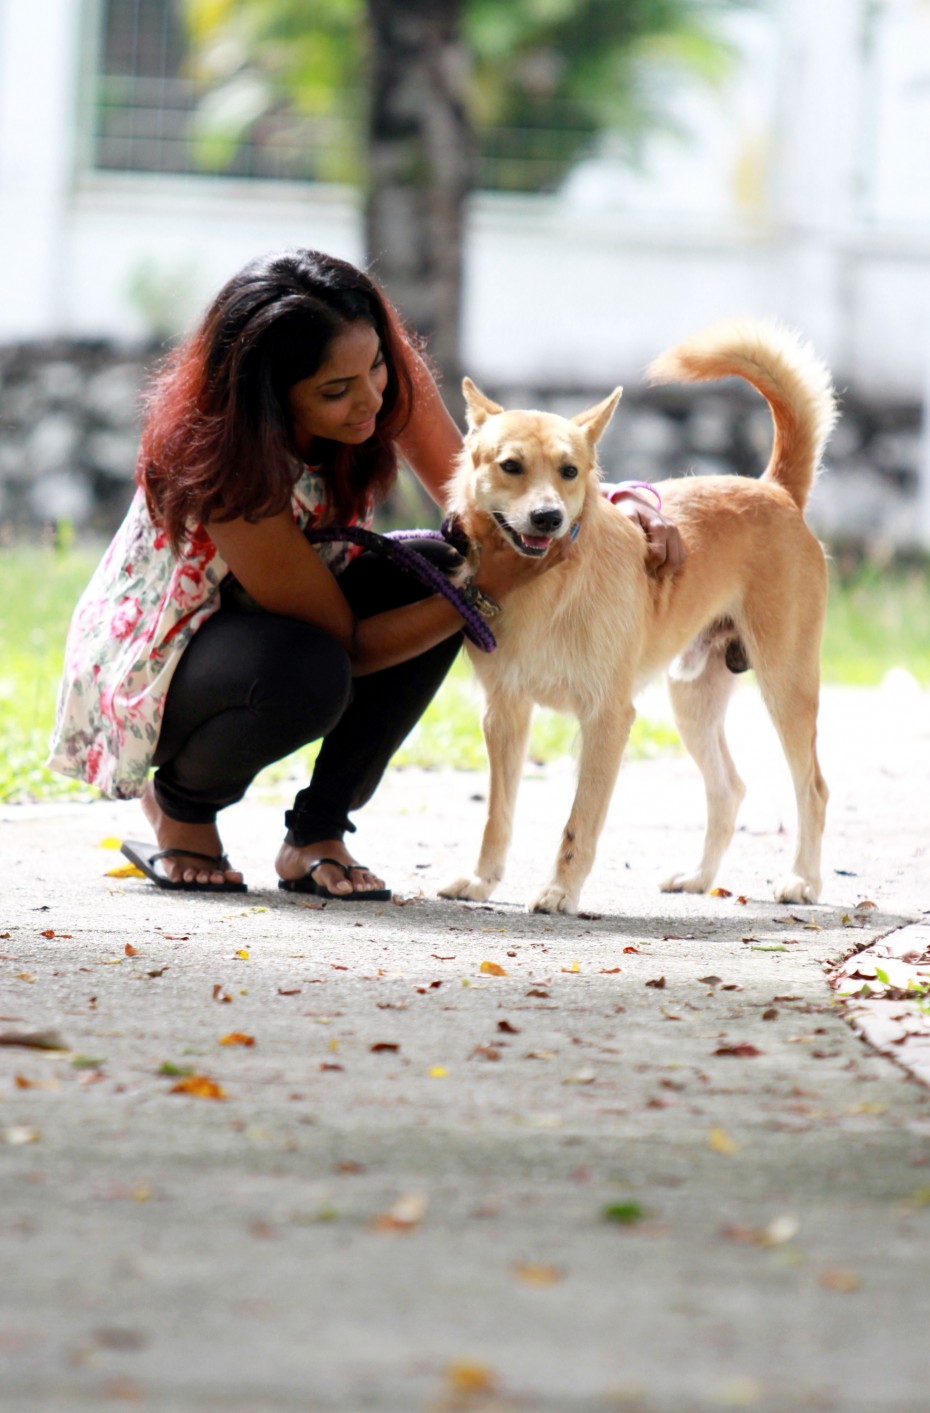 Darshana says young Malaysians can help by running animal rights campaigns in their local communities. The goal would be simple – get all strays in your neighbourhood spayed and adopted.